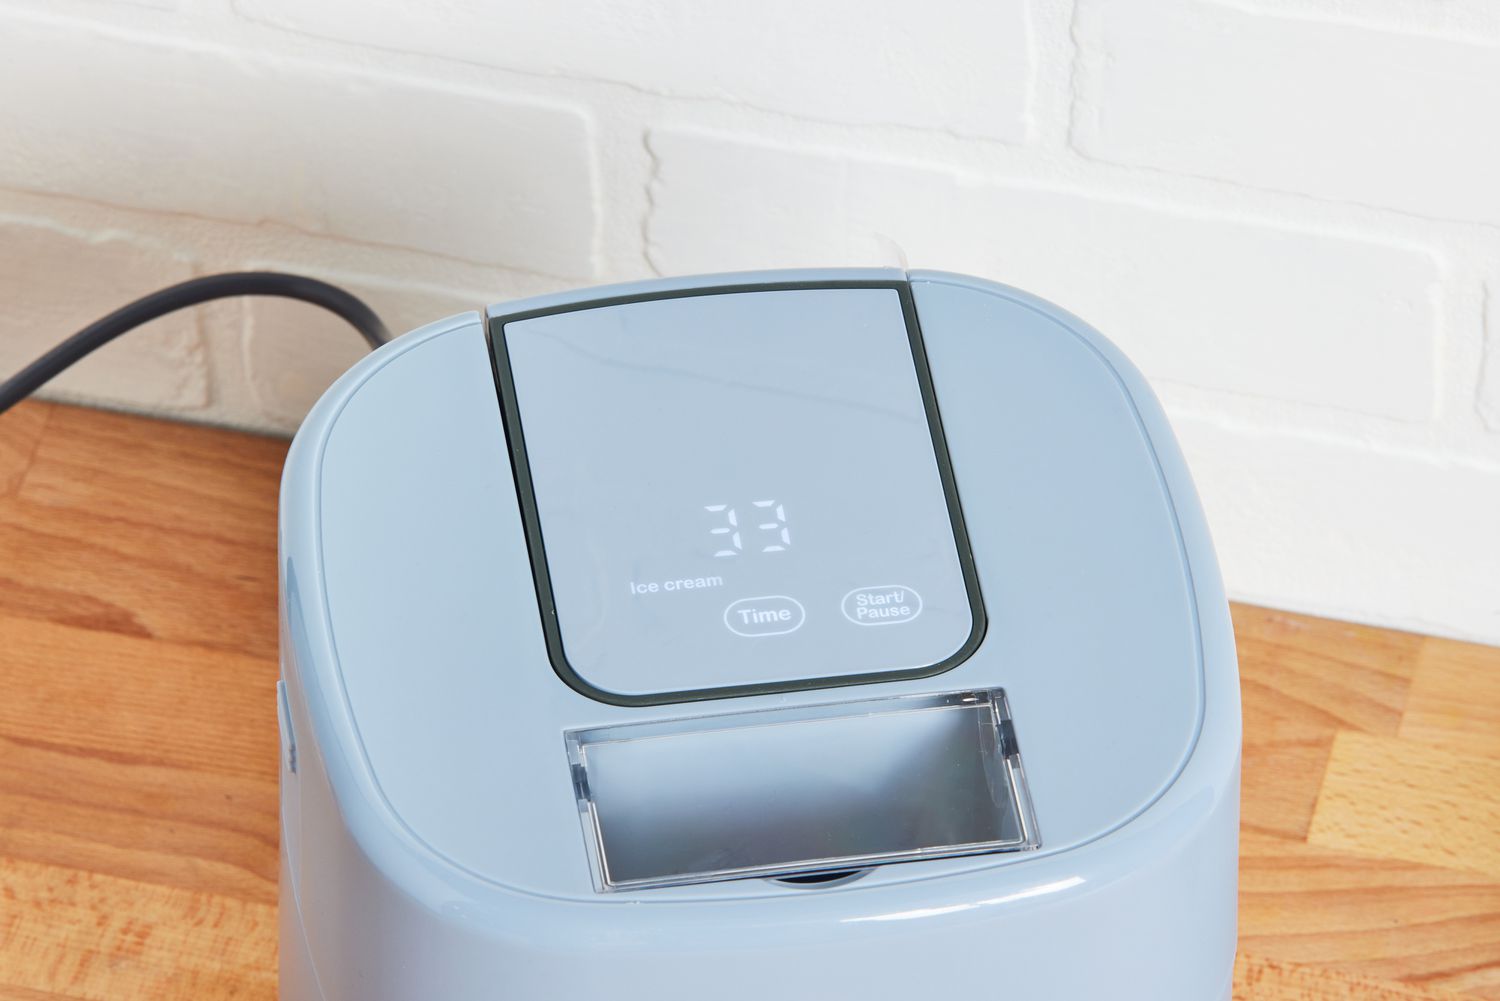 The Beautiful by Drew Barrymore Ice Cream Maker sitting on a counter with the touchscreen display on